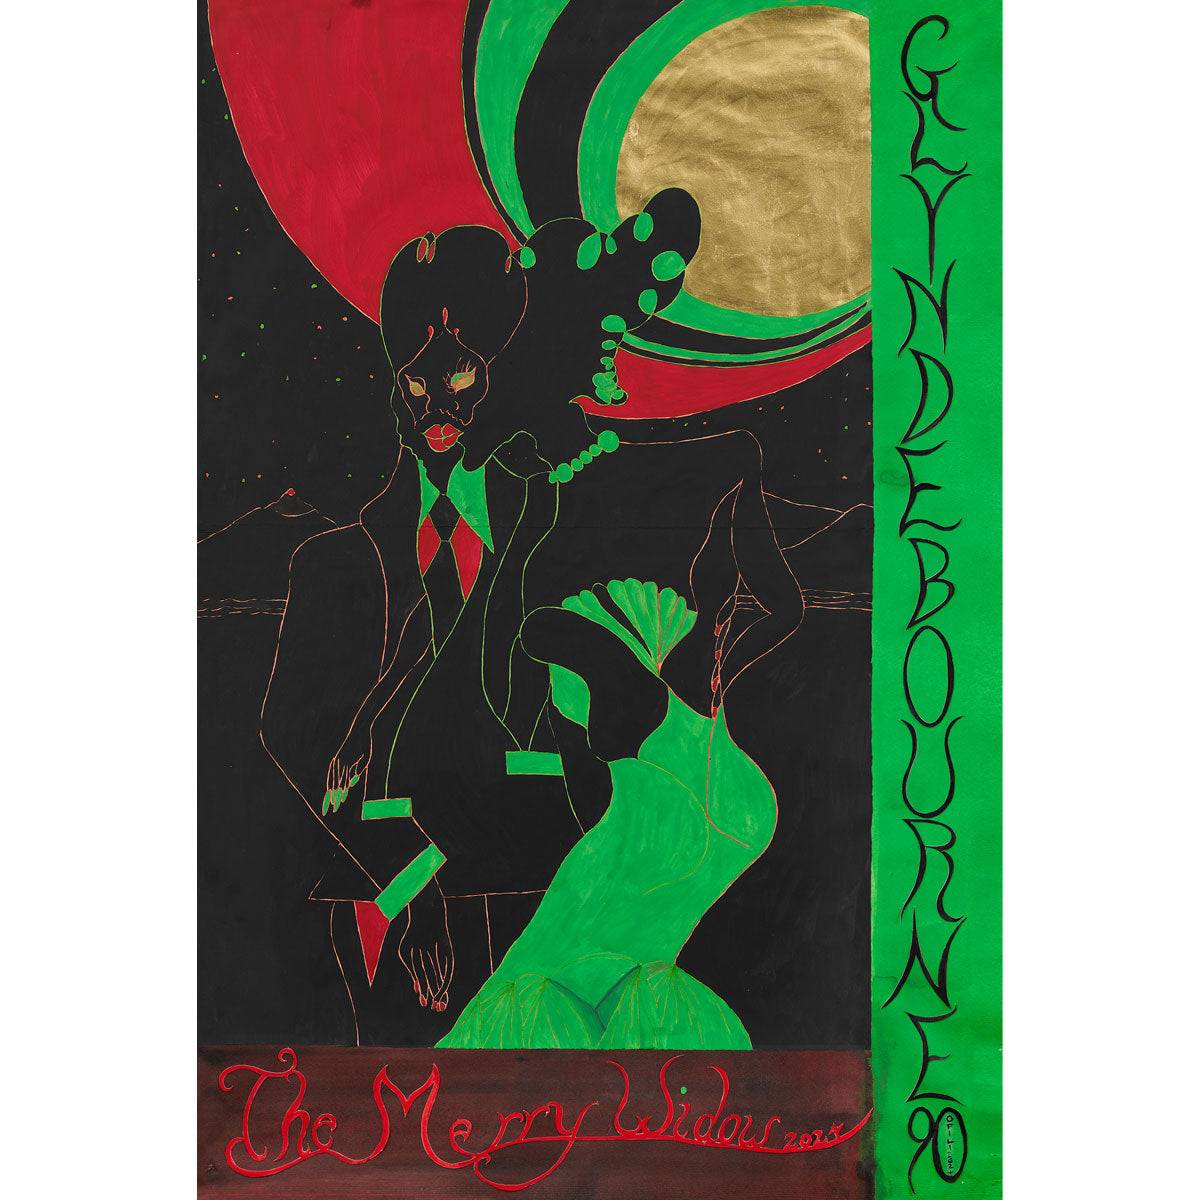  Glyndebourne 90th Anniversary Poster by Chris Ofili